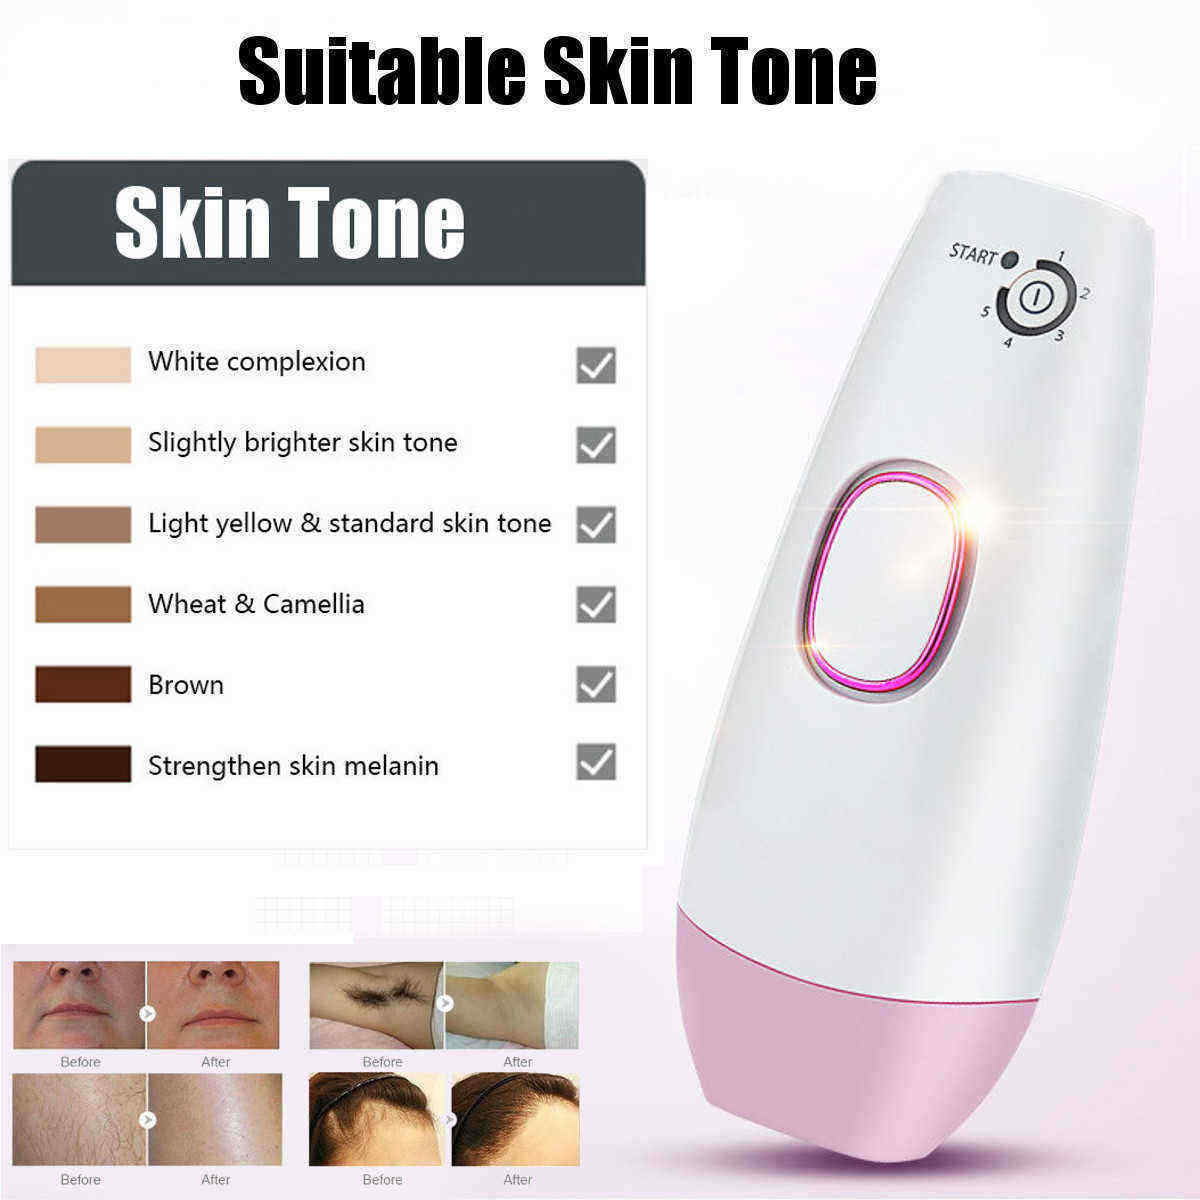 100-240V-300000-Pulses-IPL-Permanent-Hair-Laser-Removal-for-Body-Face-Home-Use-Device-Depilatory-Epi-1433342